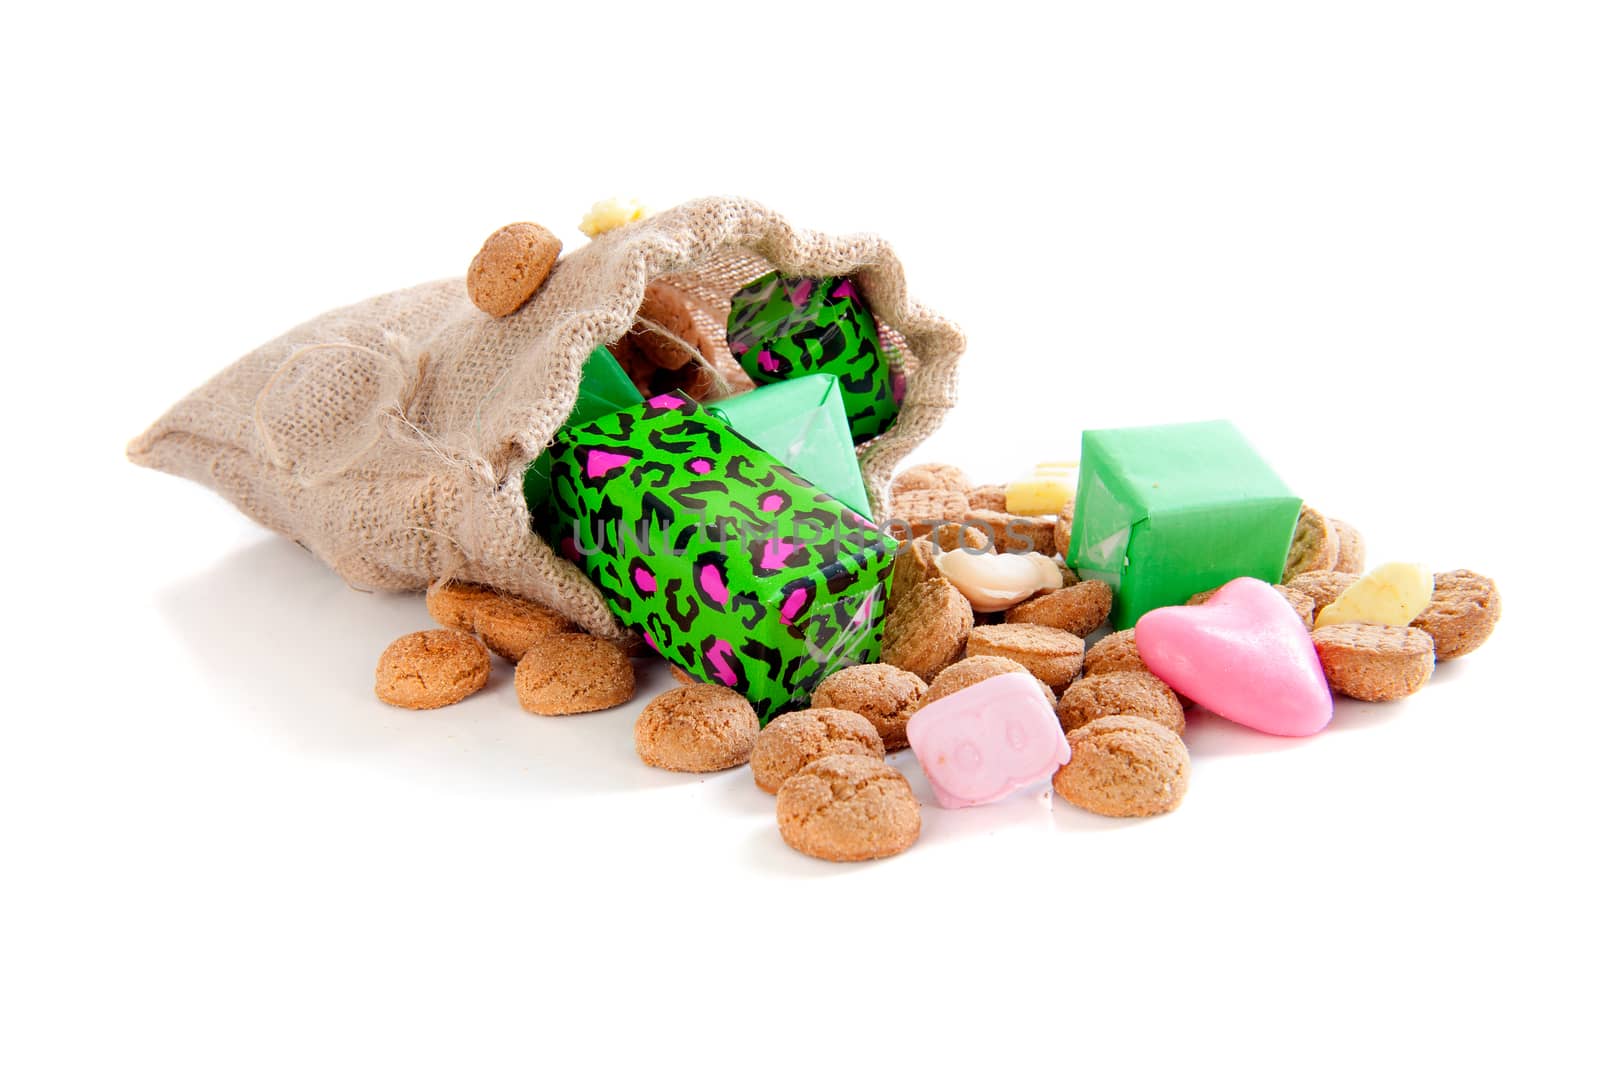 A jute bag with gingernuts, for celebrating the dutch holiday " sinterklaas " on the fifth of December